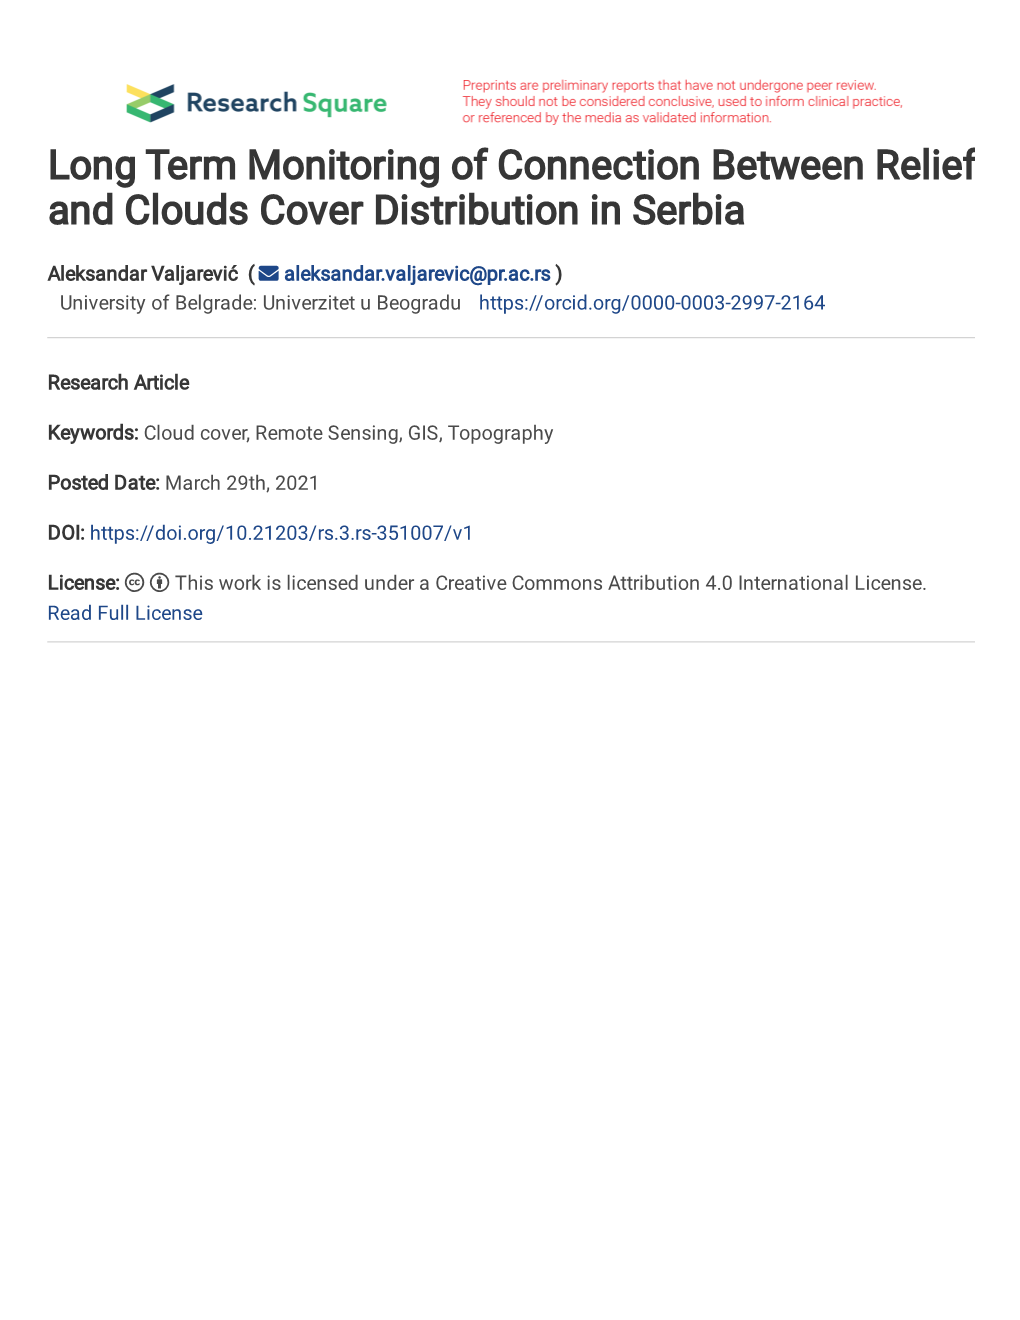 Long Term Monitoring of Connection Between Relief and Clouds Cover Distribution in Serbia Abstract